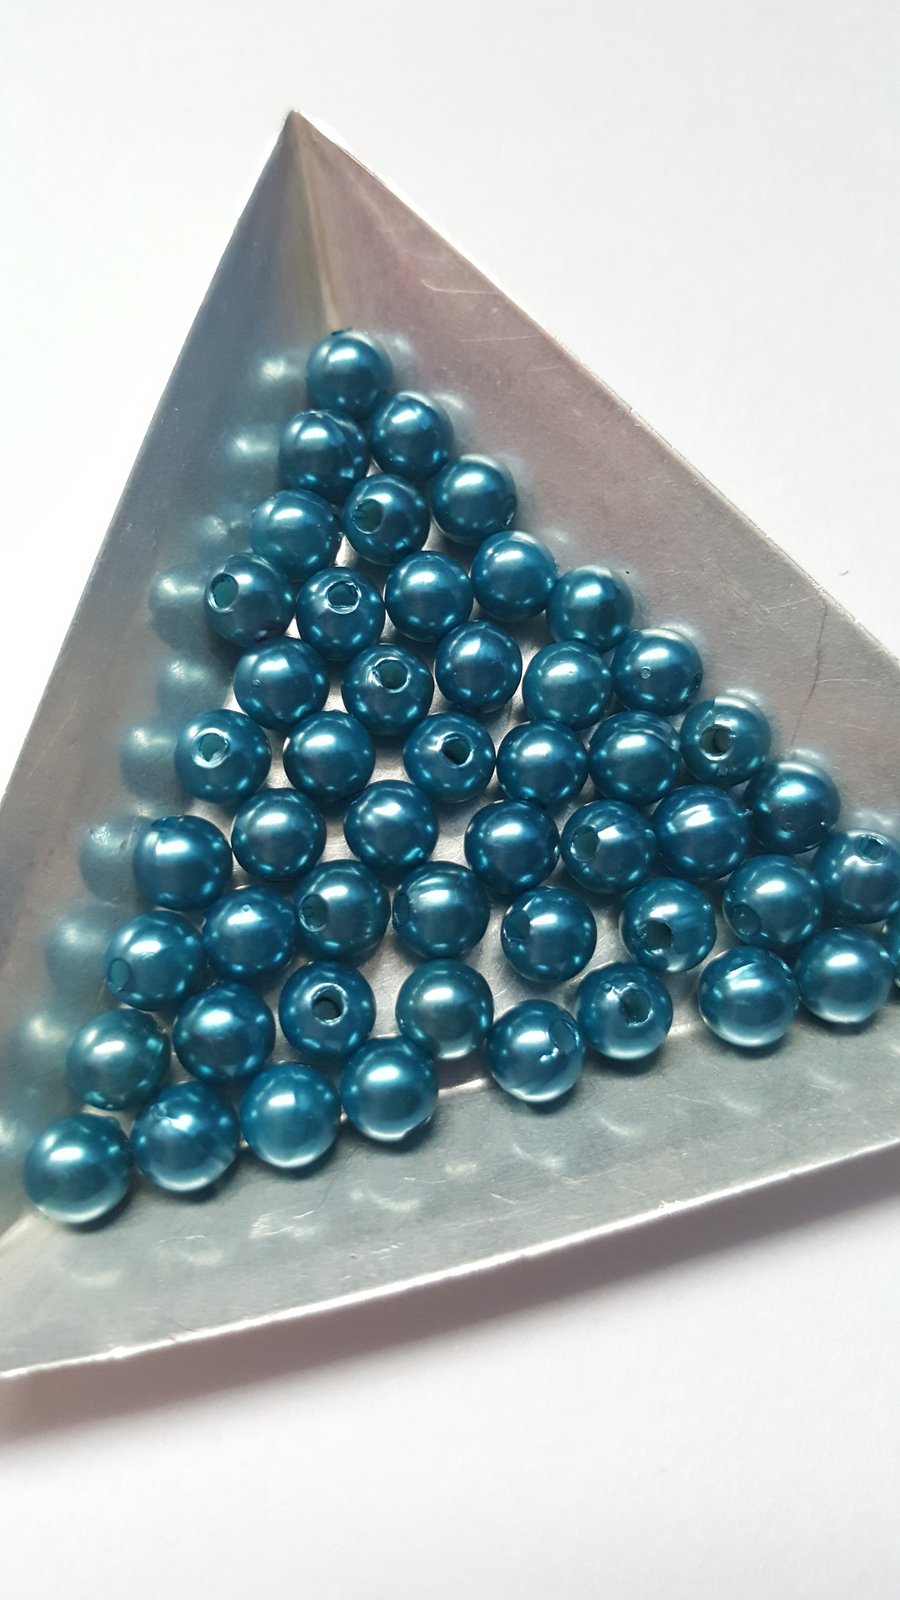 50 x Acrylic Pearl Beads - Round - 6mm - Blue 